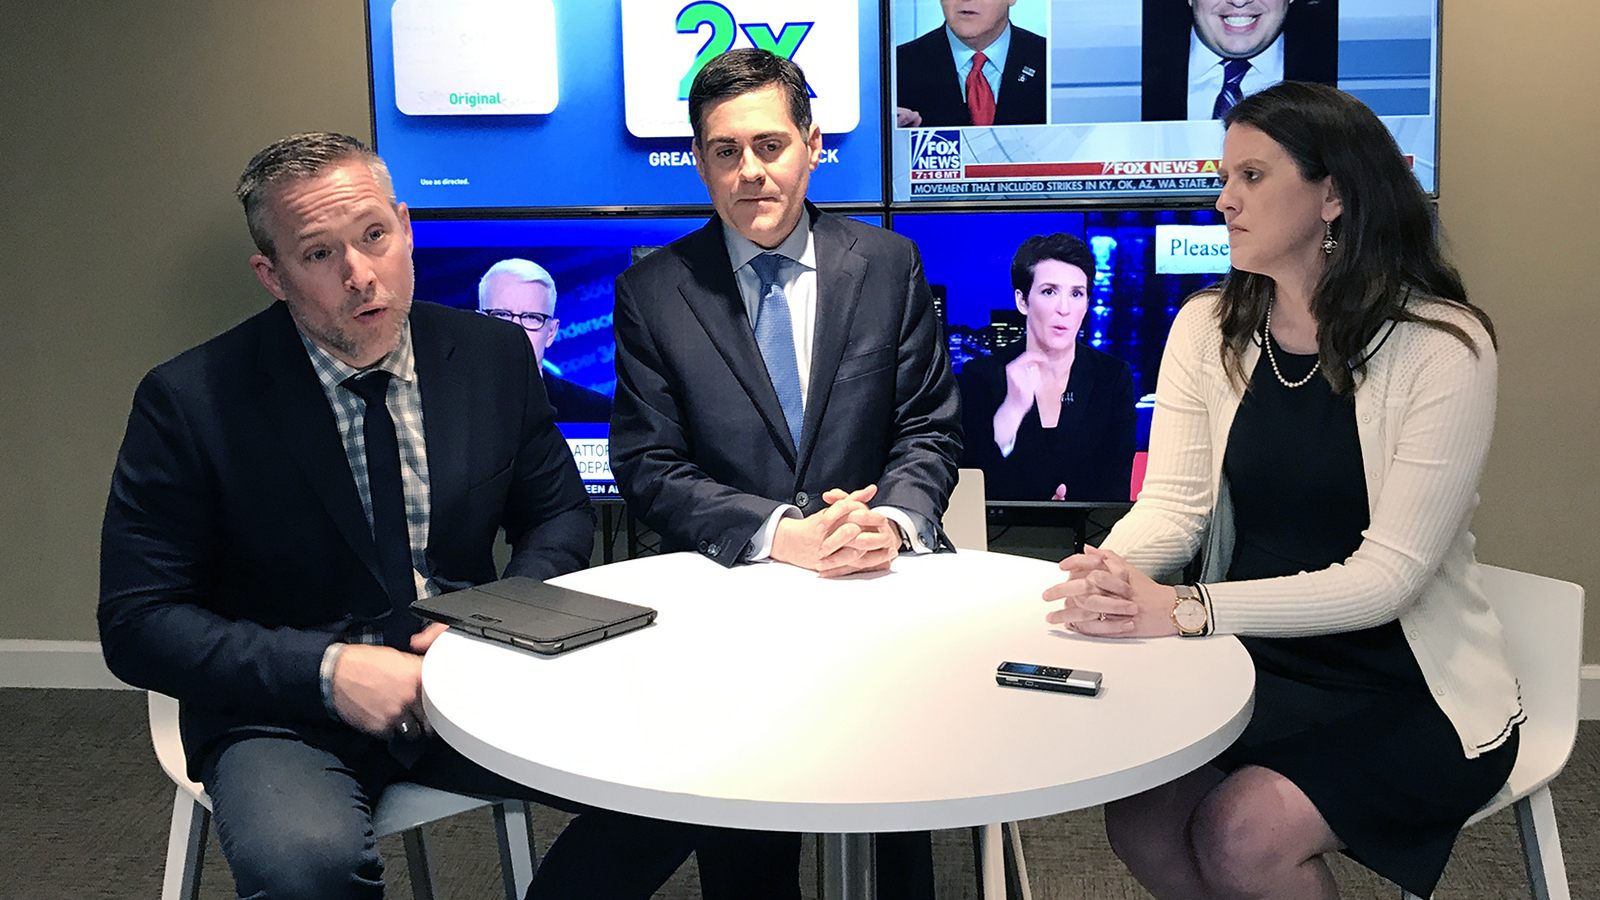 J.D. Greear, from left, Russell Moore, and Amy Whitfield speak with press at the Southern Baptist Convention headquarters in Nashville, Tenn., on Feb. 18, 2019. RNS photo by Bob Smietana